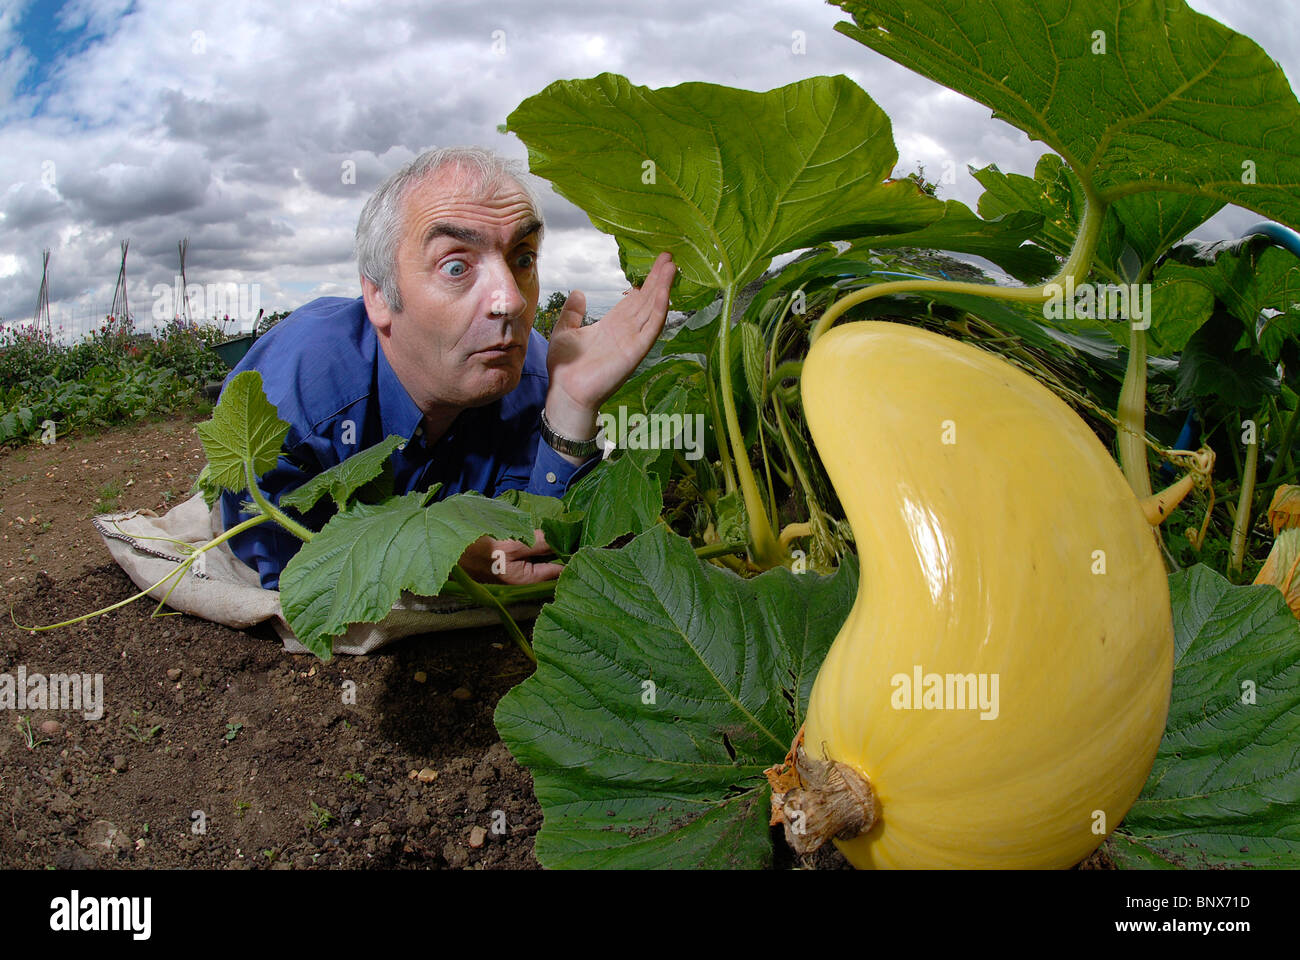 Talking to his veg- Giant veg grower Clive Bevan chats to one of his pumpkins. Stock Photo